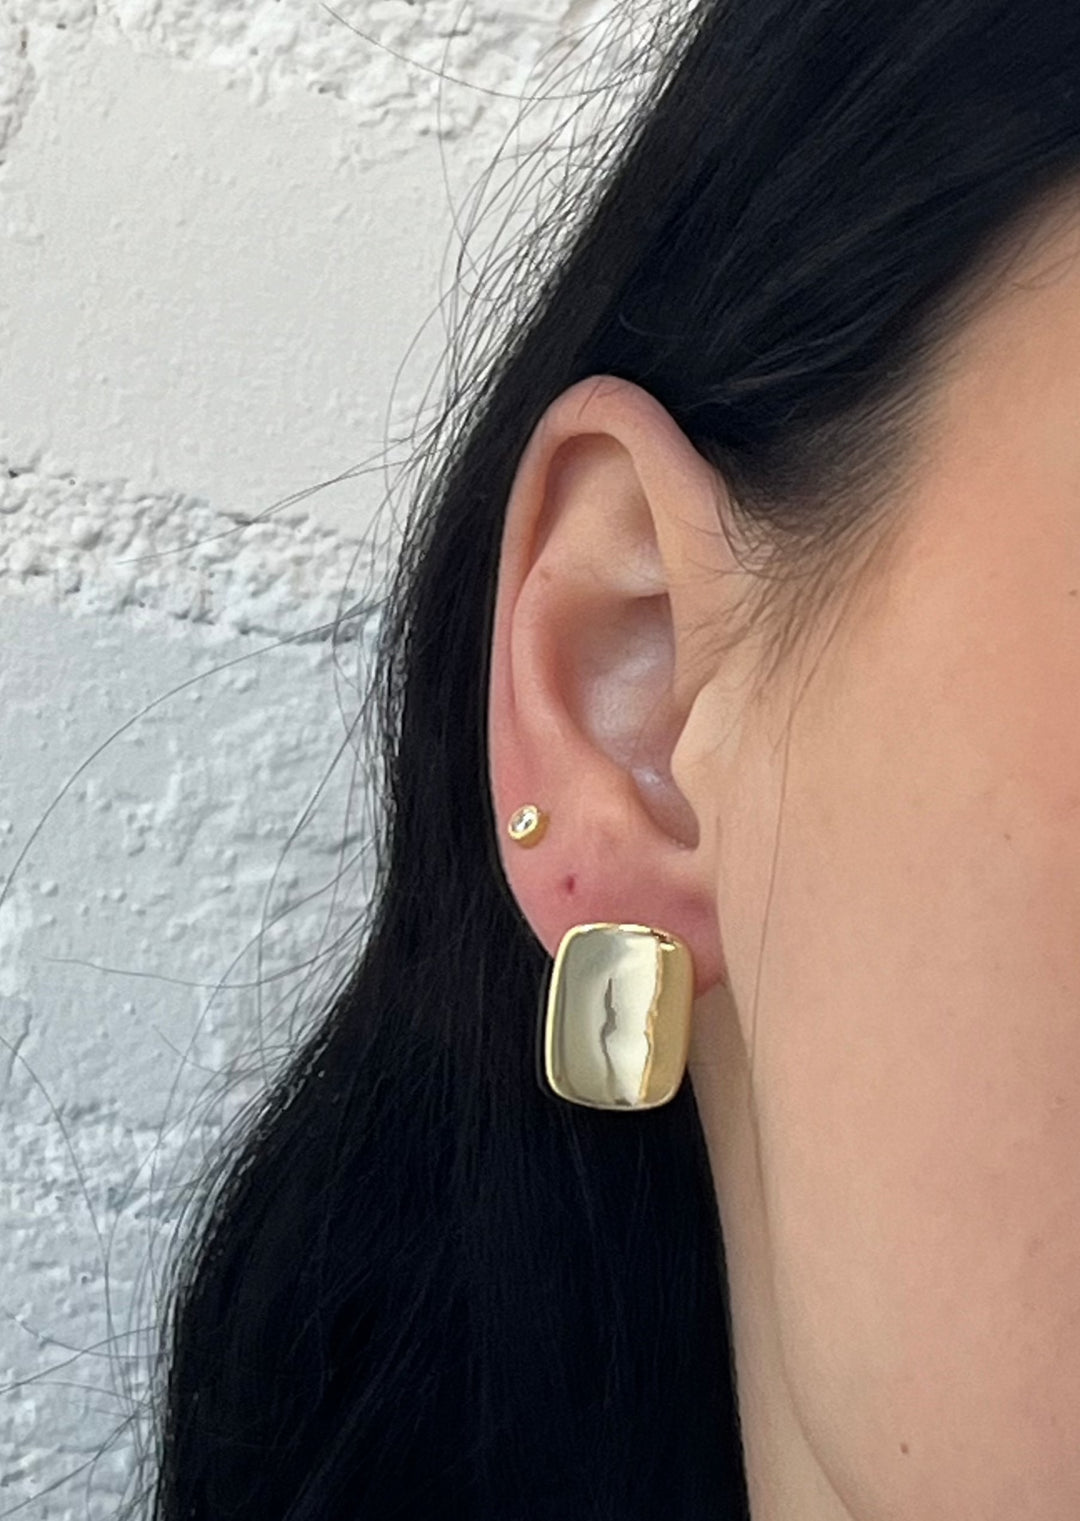 Dotty Earring, Jewelry, Adeline, Adeline, dallas boutique, dallas texas, texas boutique, women's boutique dallas, adeline boutique, dallas boutique, trendy boutique, affordable boutique